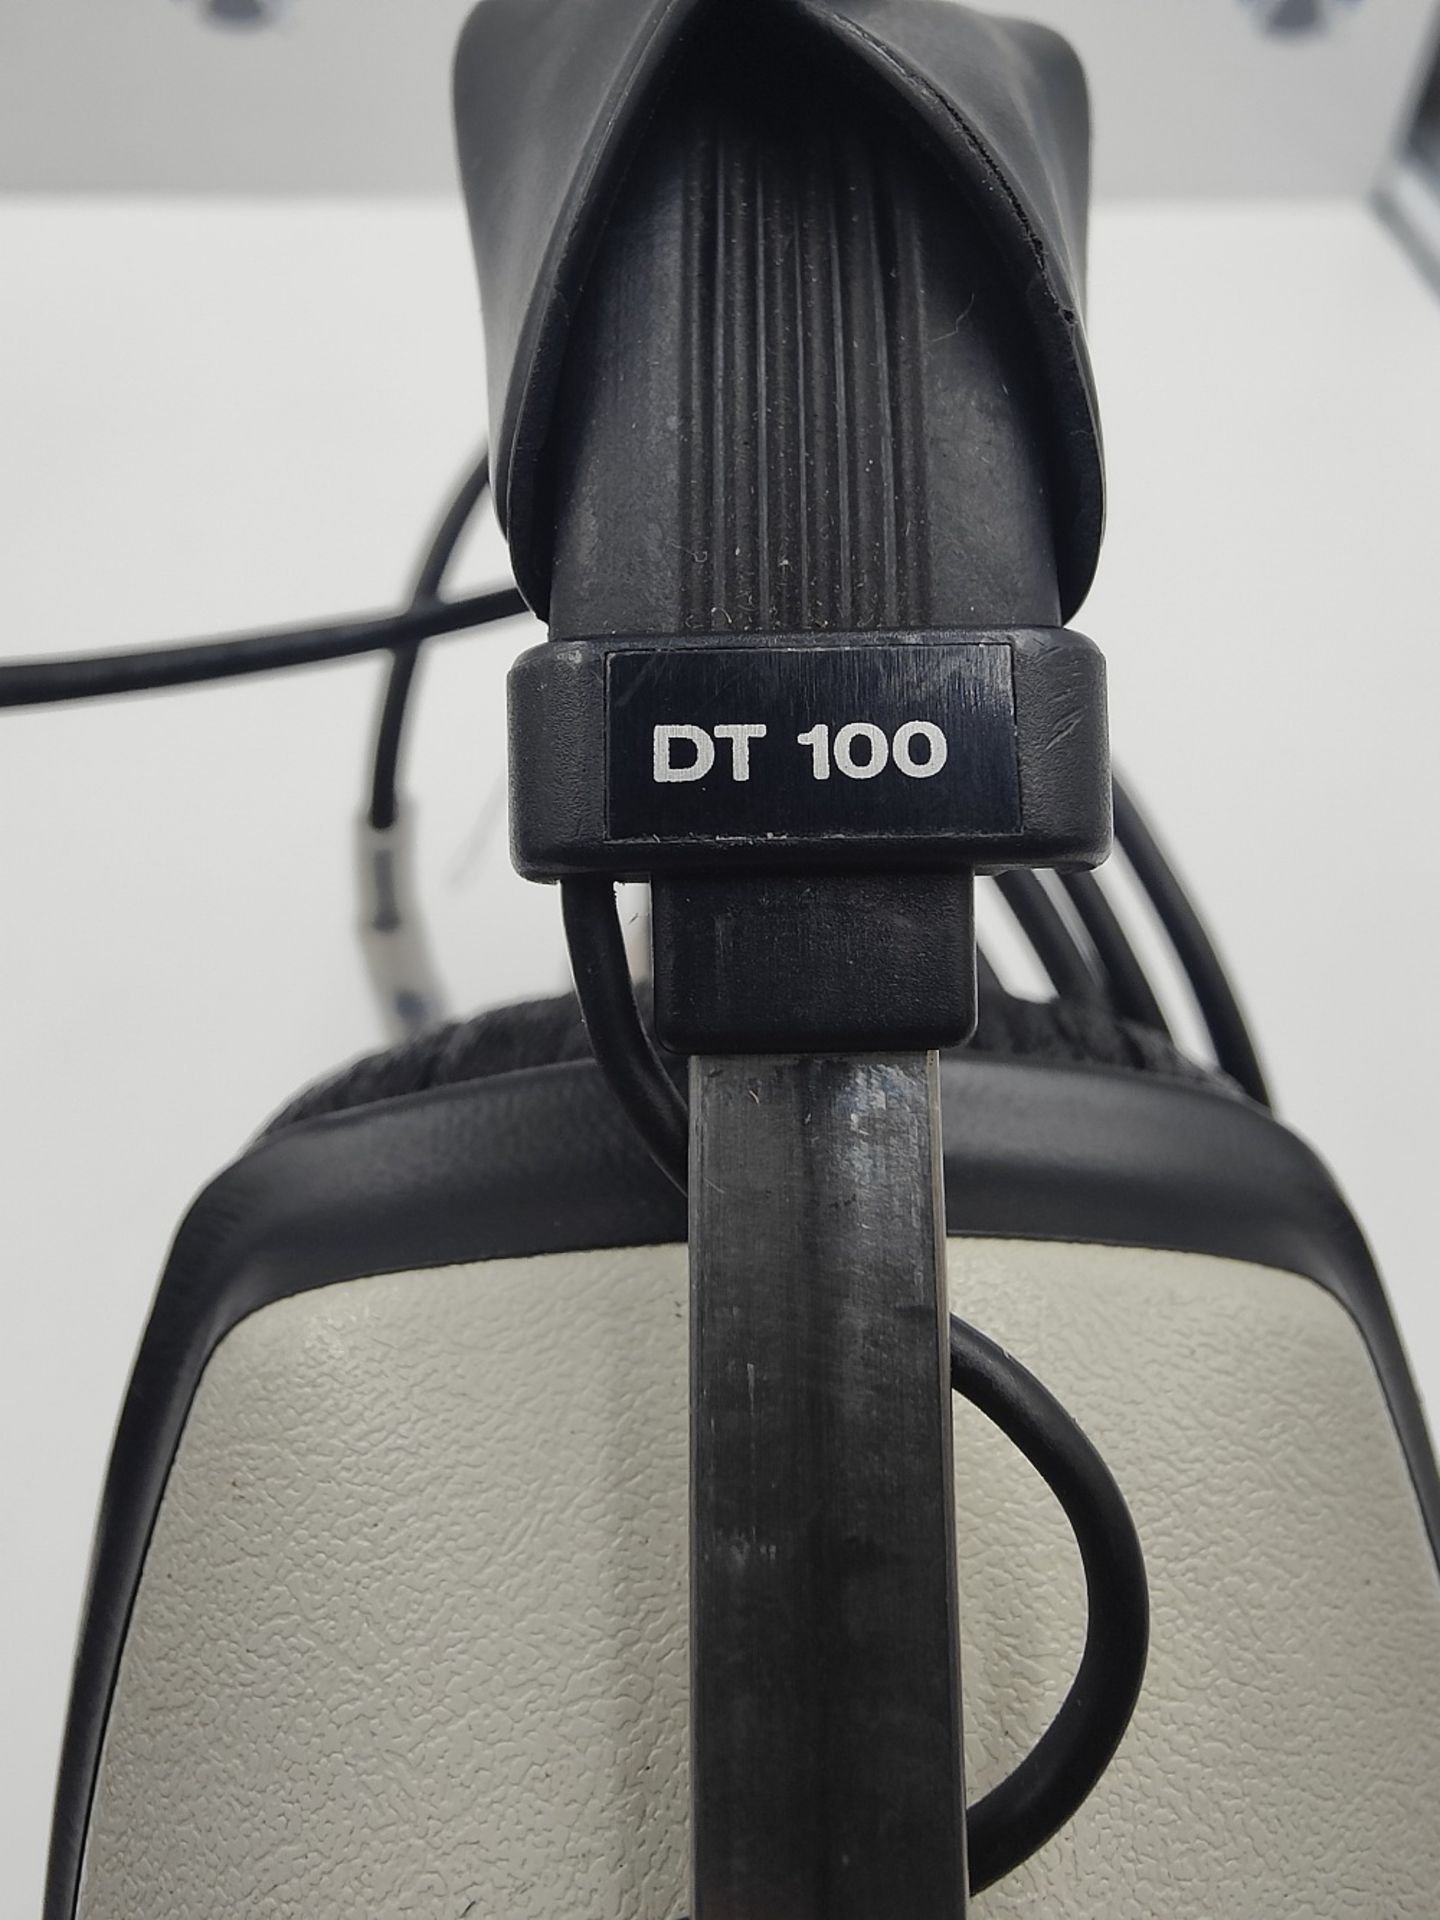 (2) Beyer Dynamic DT109 Comms Headsets & (1) Beyer Dynamic DT100 Comms Headset - Image 4 of 5